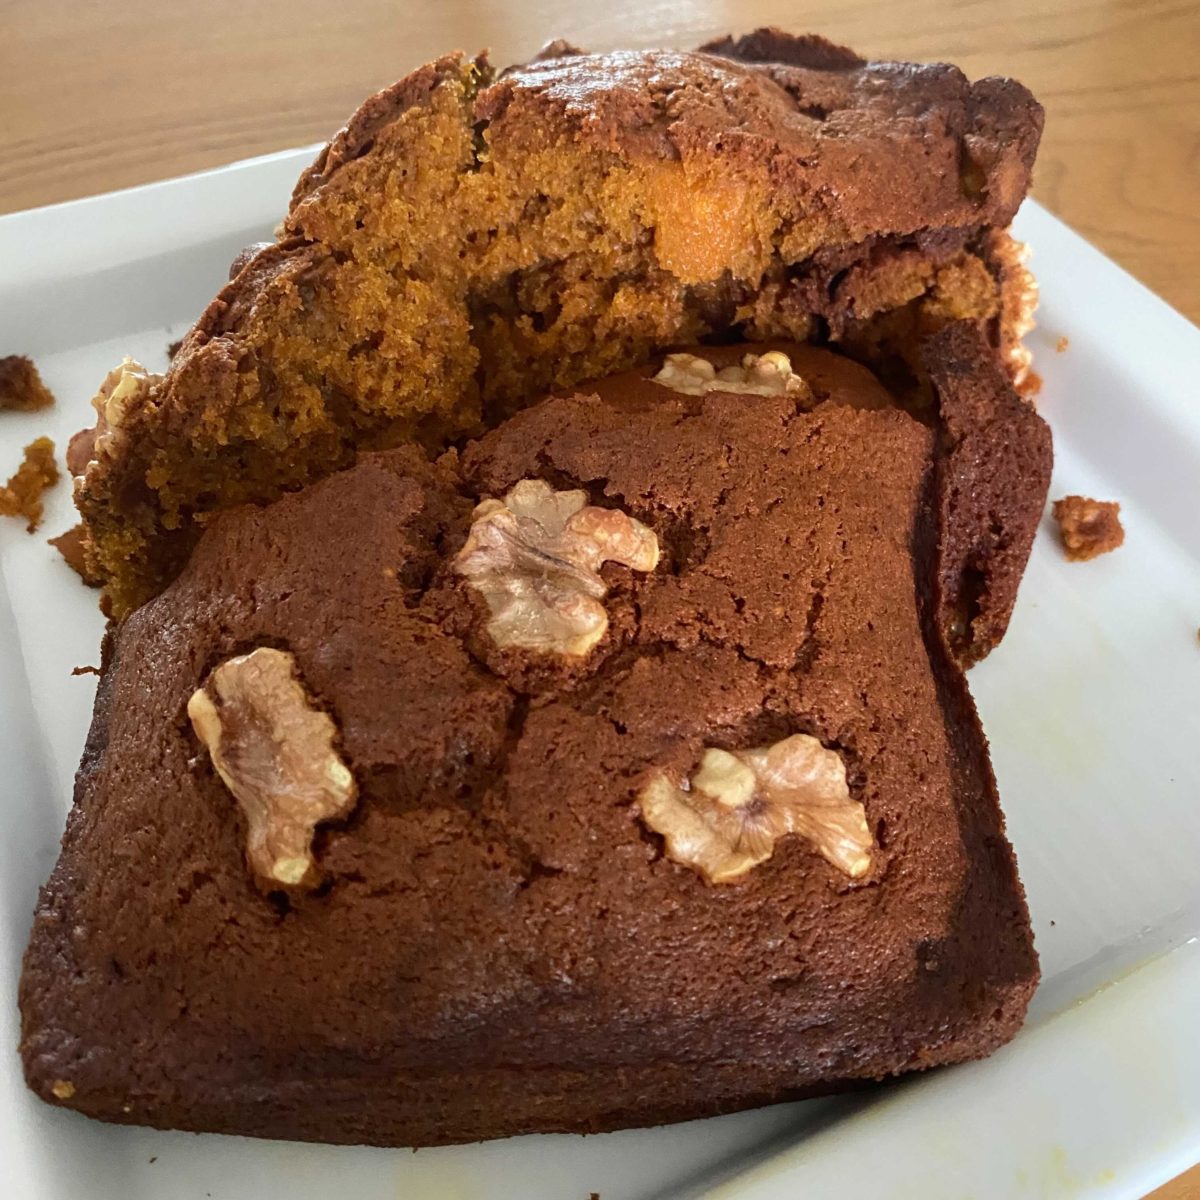 3 quarantine recipes from Stanford bakers (So that you don’t have to make 10 banana breads like I did)